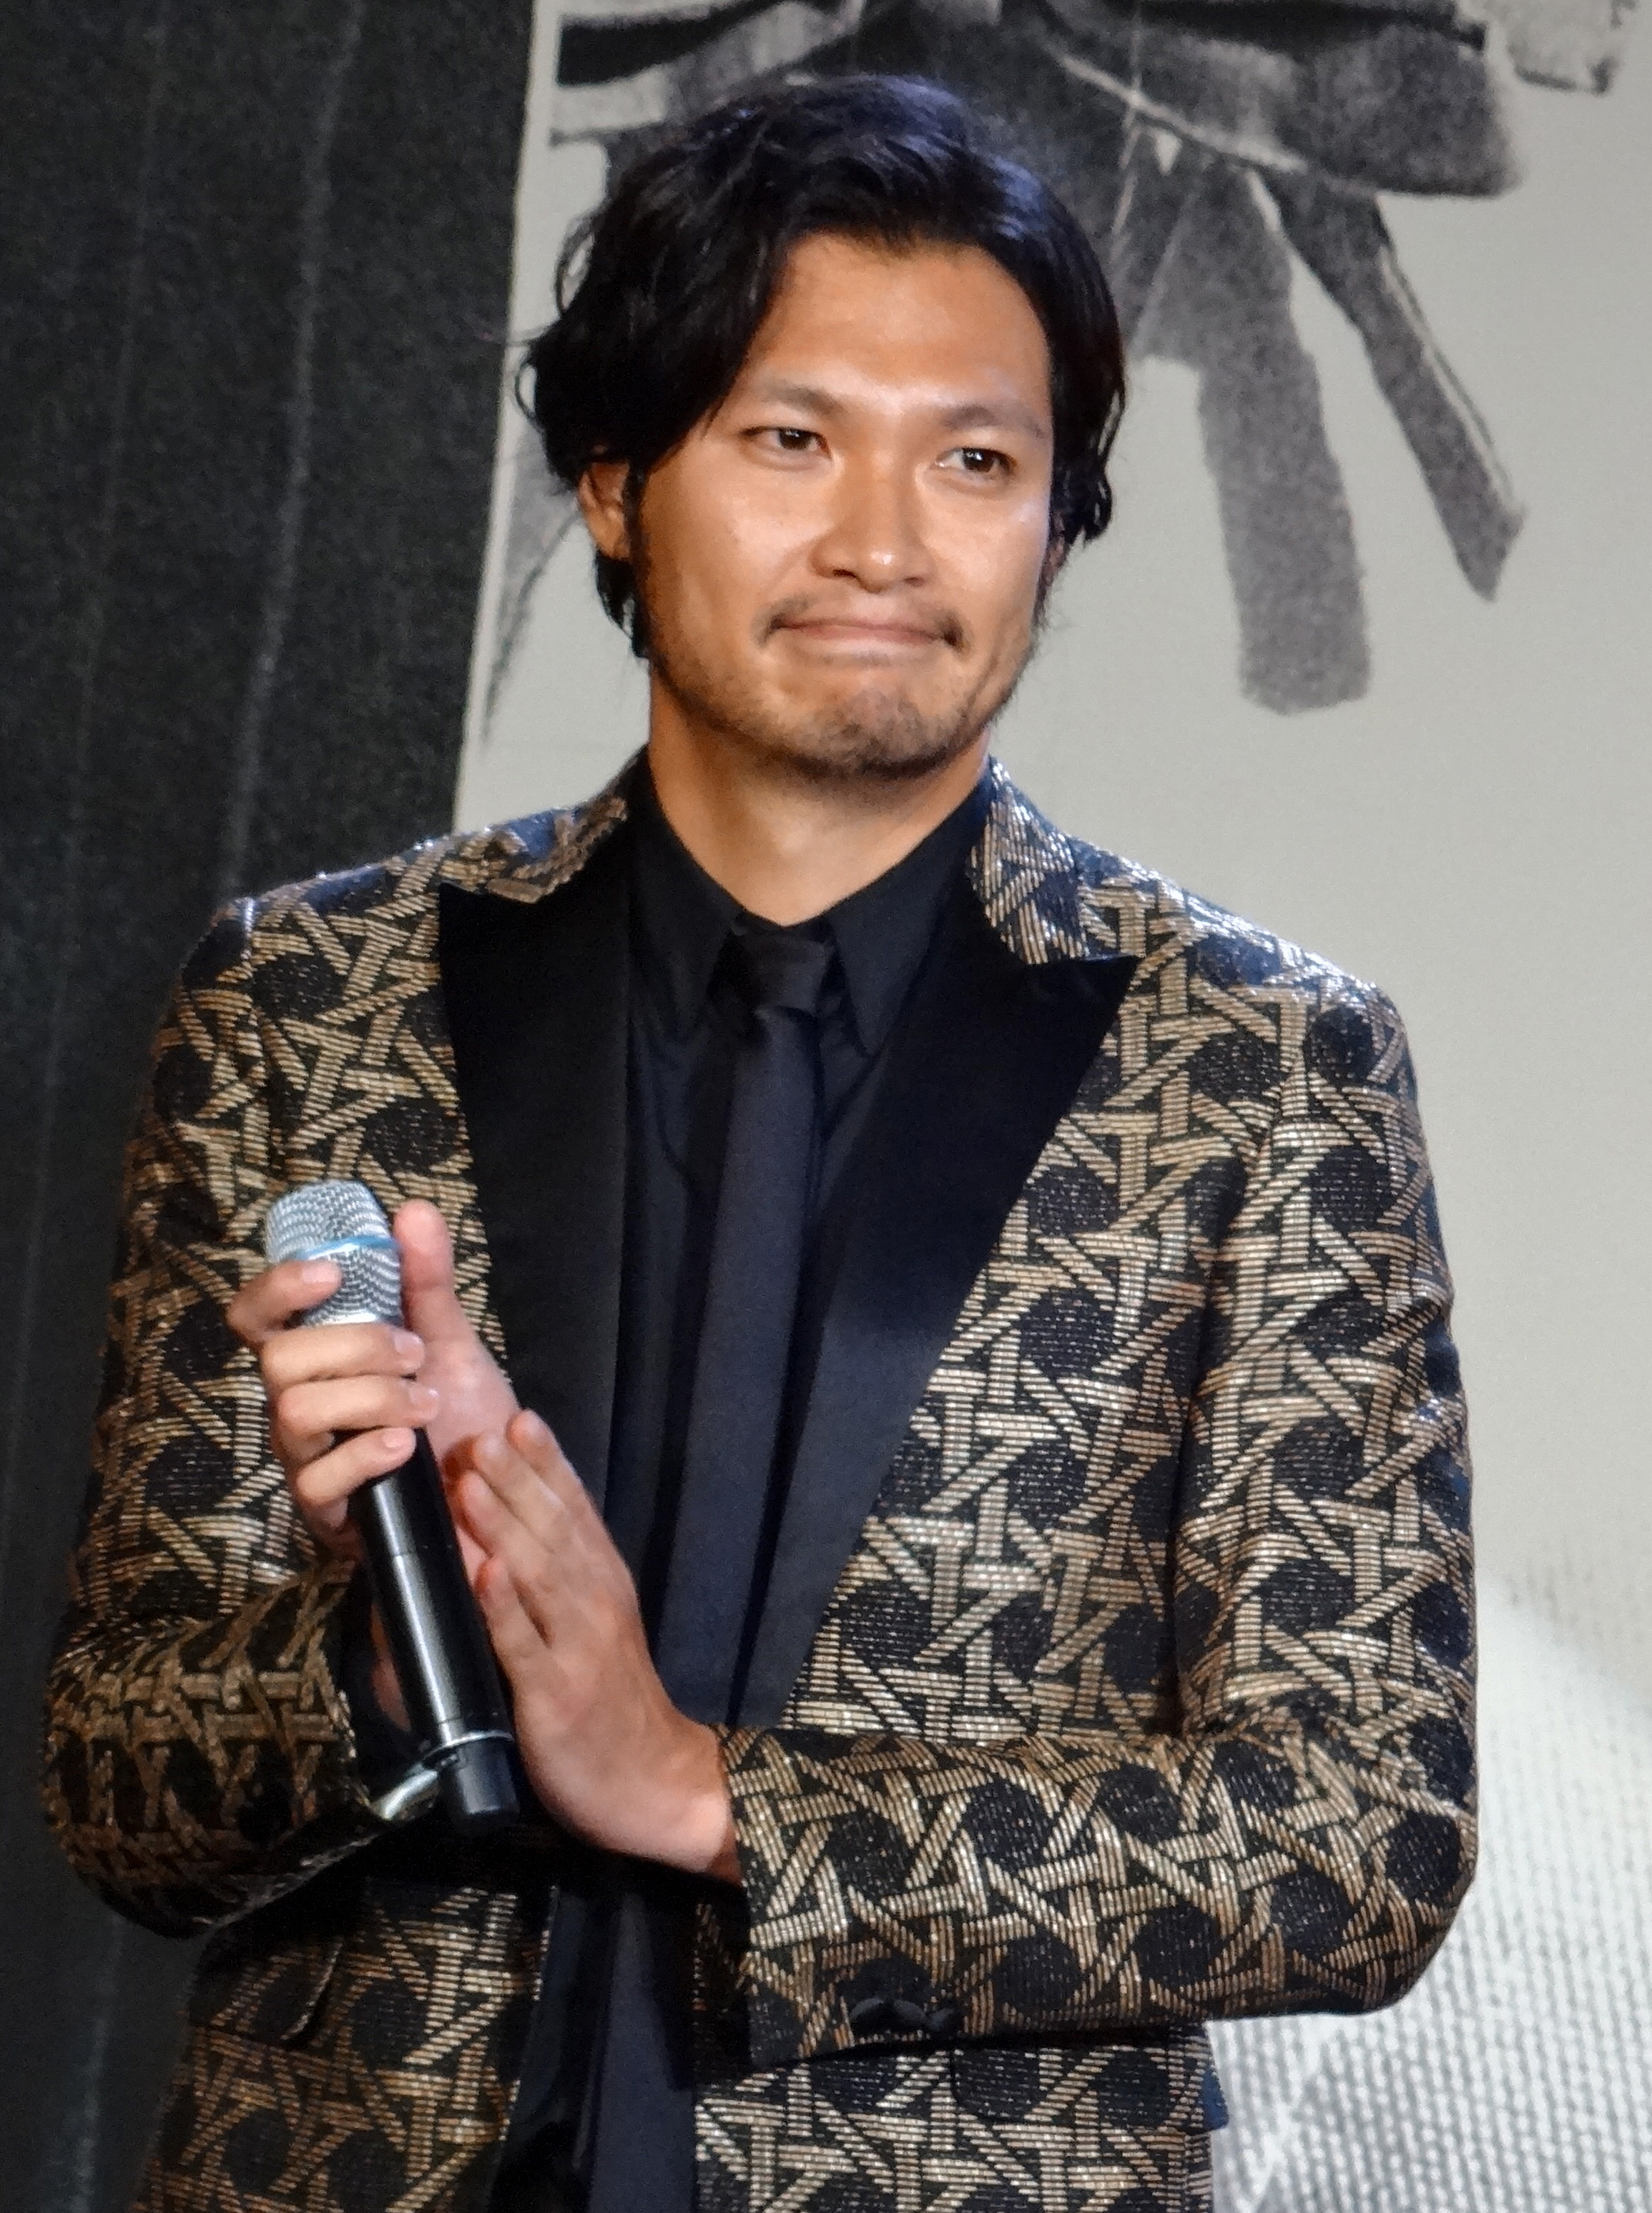 Munetaka Aoki at the Red Carpet Premiere of Rurouni Kenshin: Kyoto Inferno / The Legend Ends, on June 5, 2014